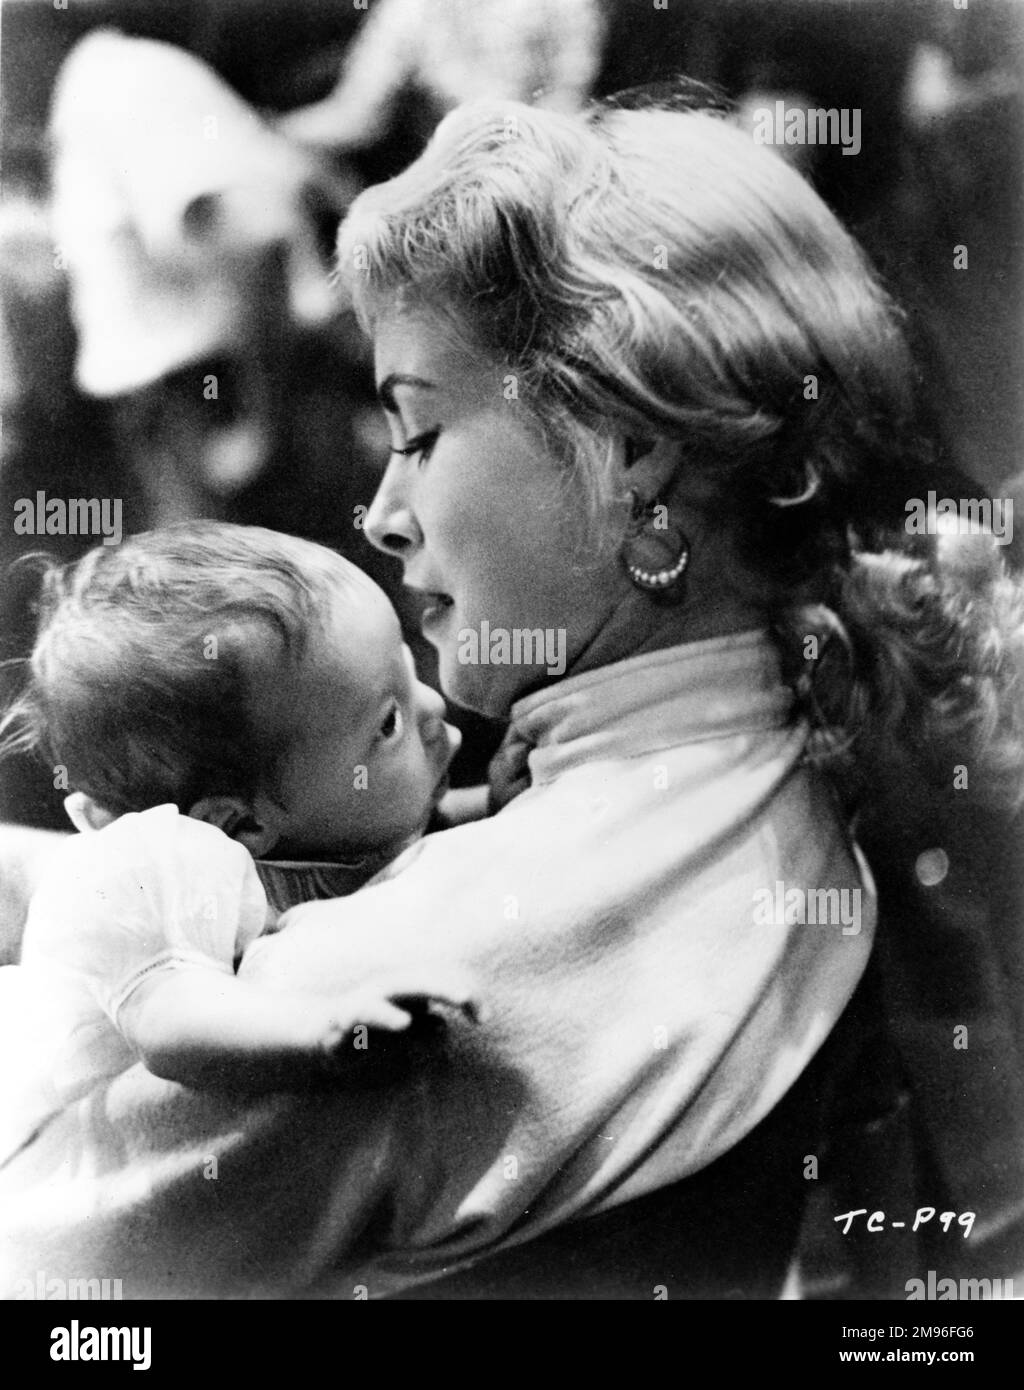 JANET LEIGH 1956 on set candid with her first child with husband TONY CURTIS daughter KELLY CURTIS publicity for Universal International Pictures (UI) Stock Photo